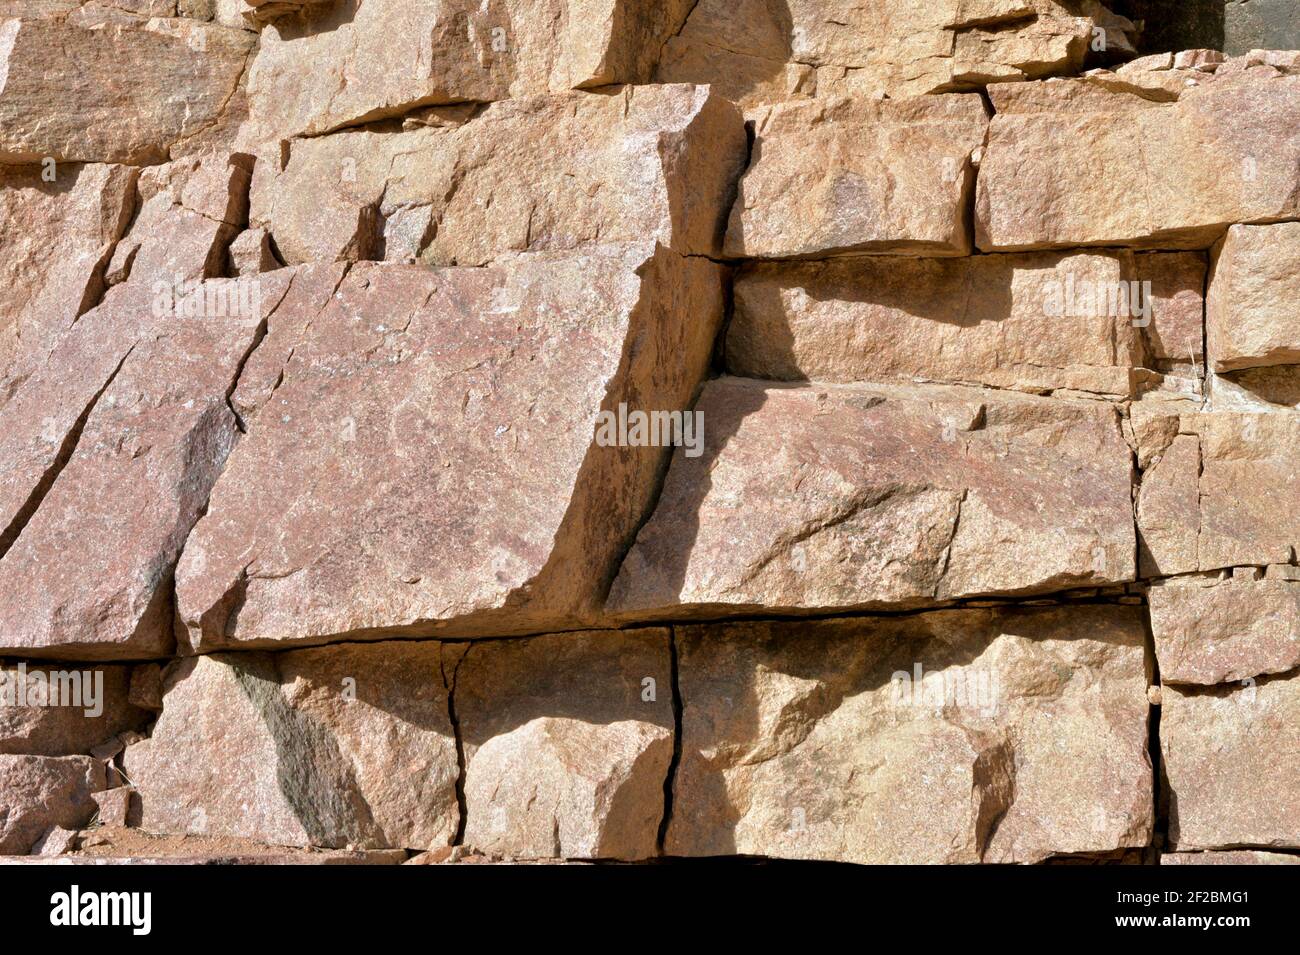 Granite Rock and Stone Abstract Background with multi-colors and veins. Stock Photo